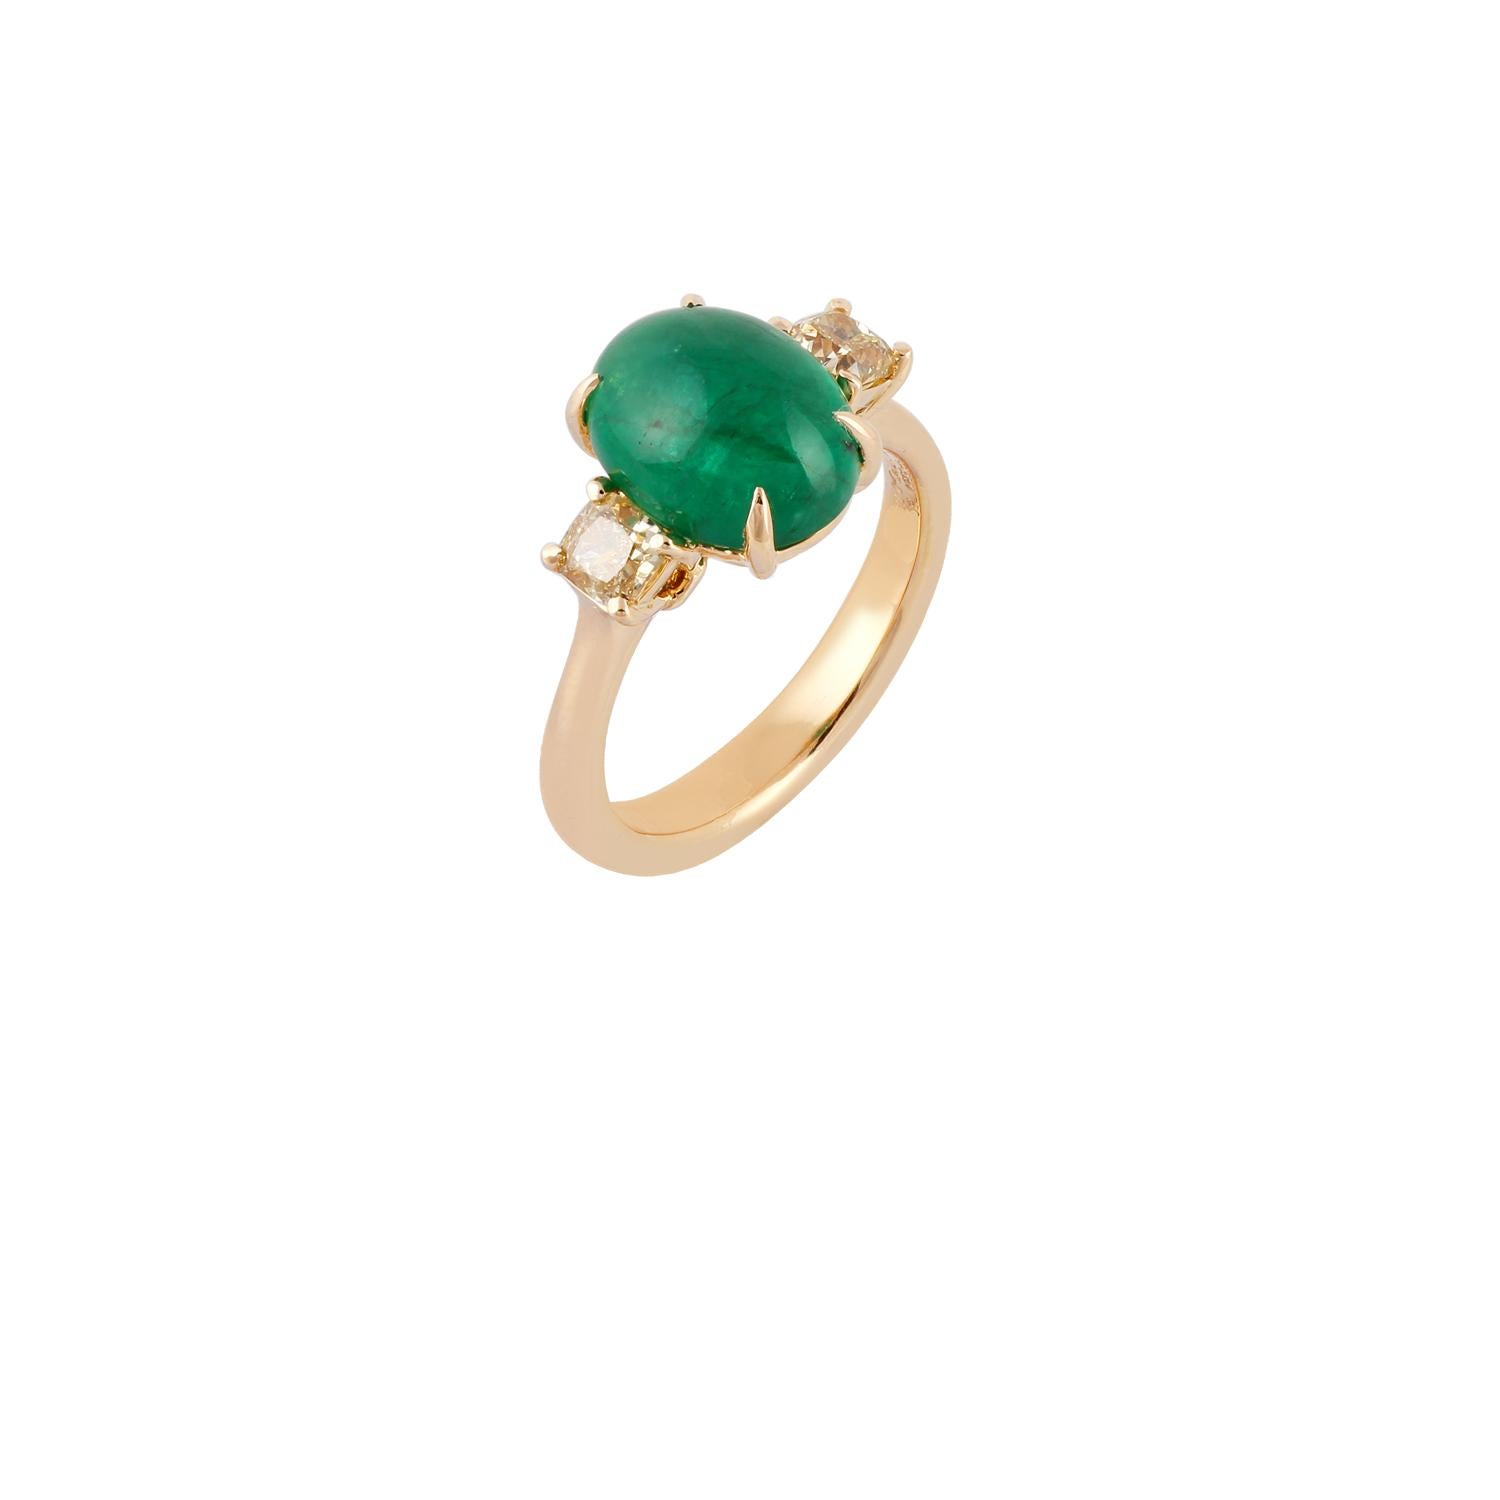 4.17 Carat Cabochon Emerald  & Fancy Diamond Ring in 18k Yellow Gold   In New Condition For Sale In Jaipur, Rajasthan